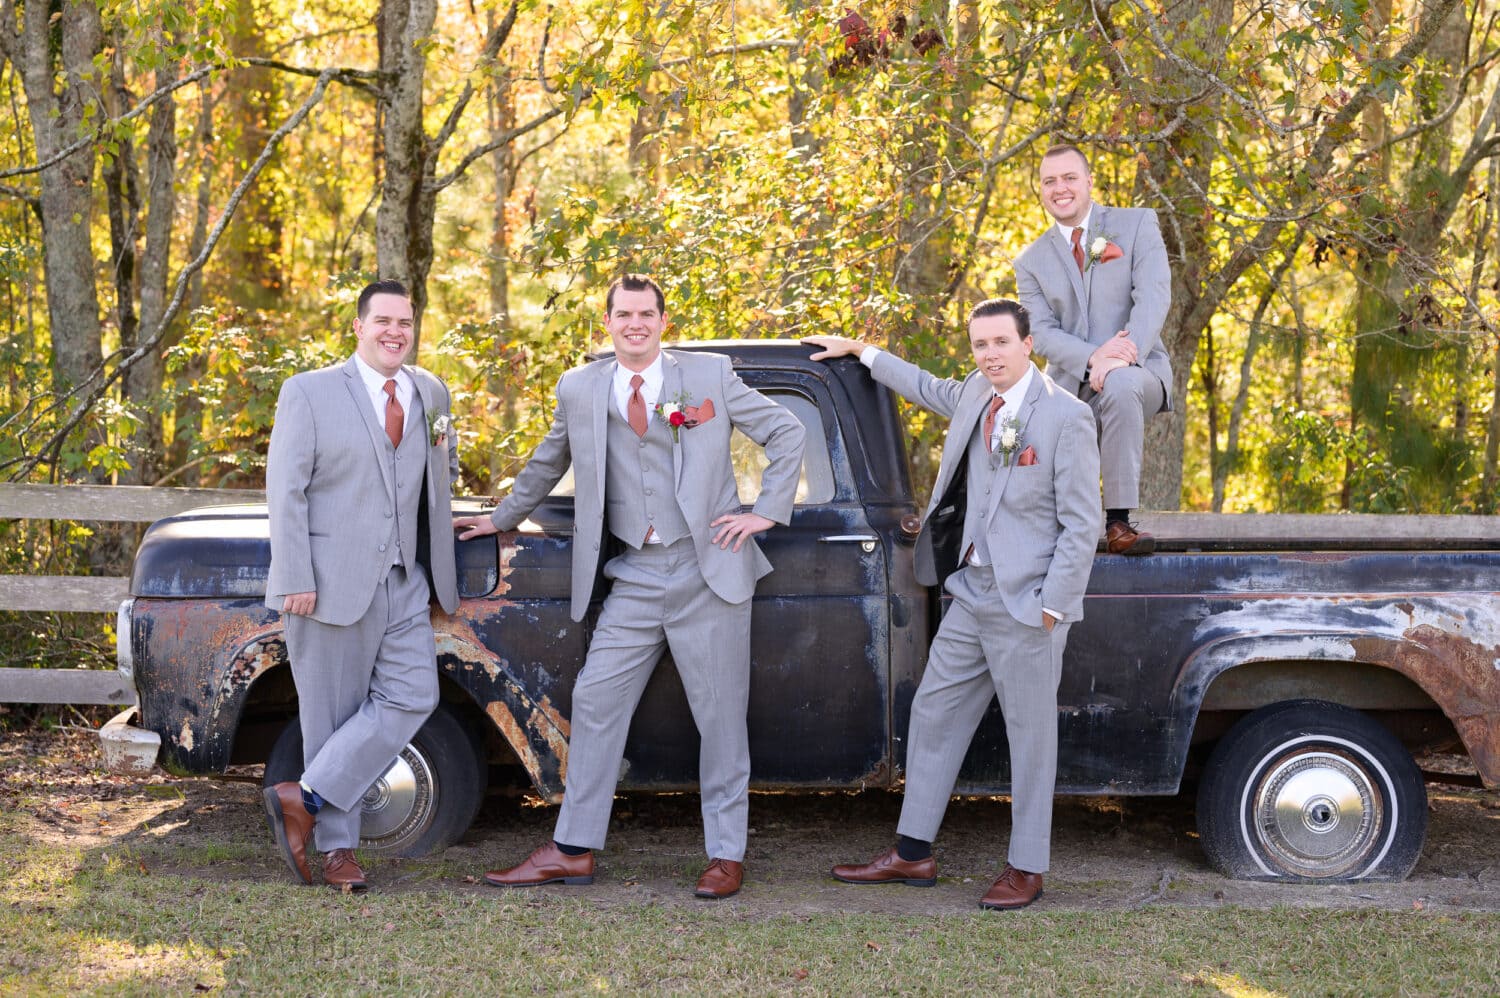 Guys posing silly by the old truck - The Blessed Barn